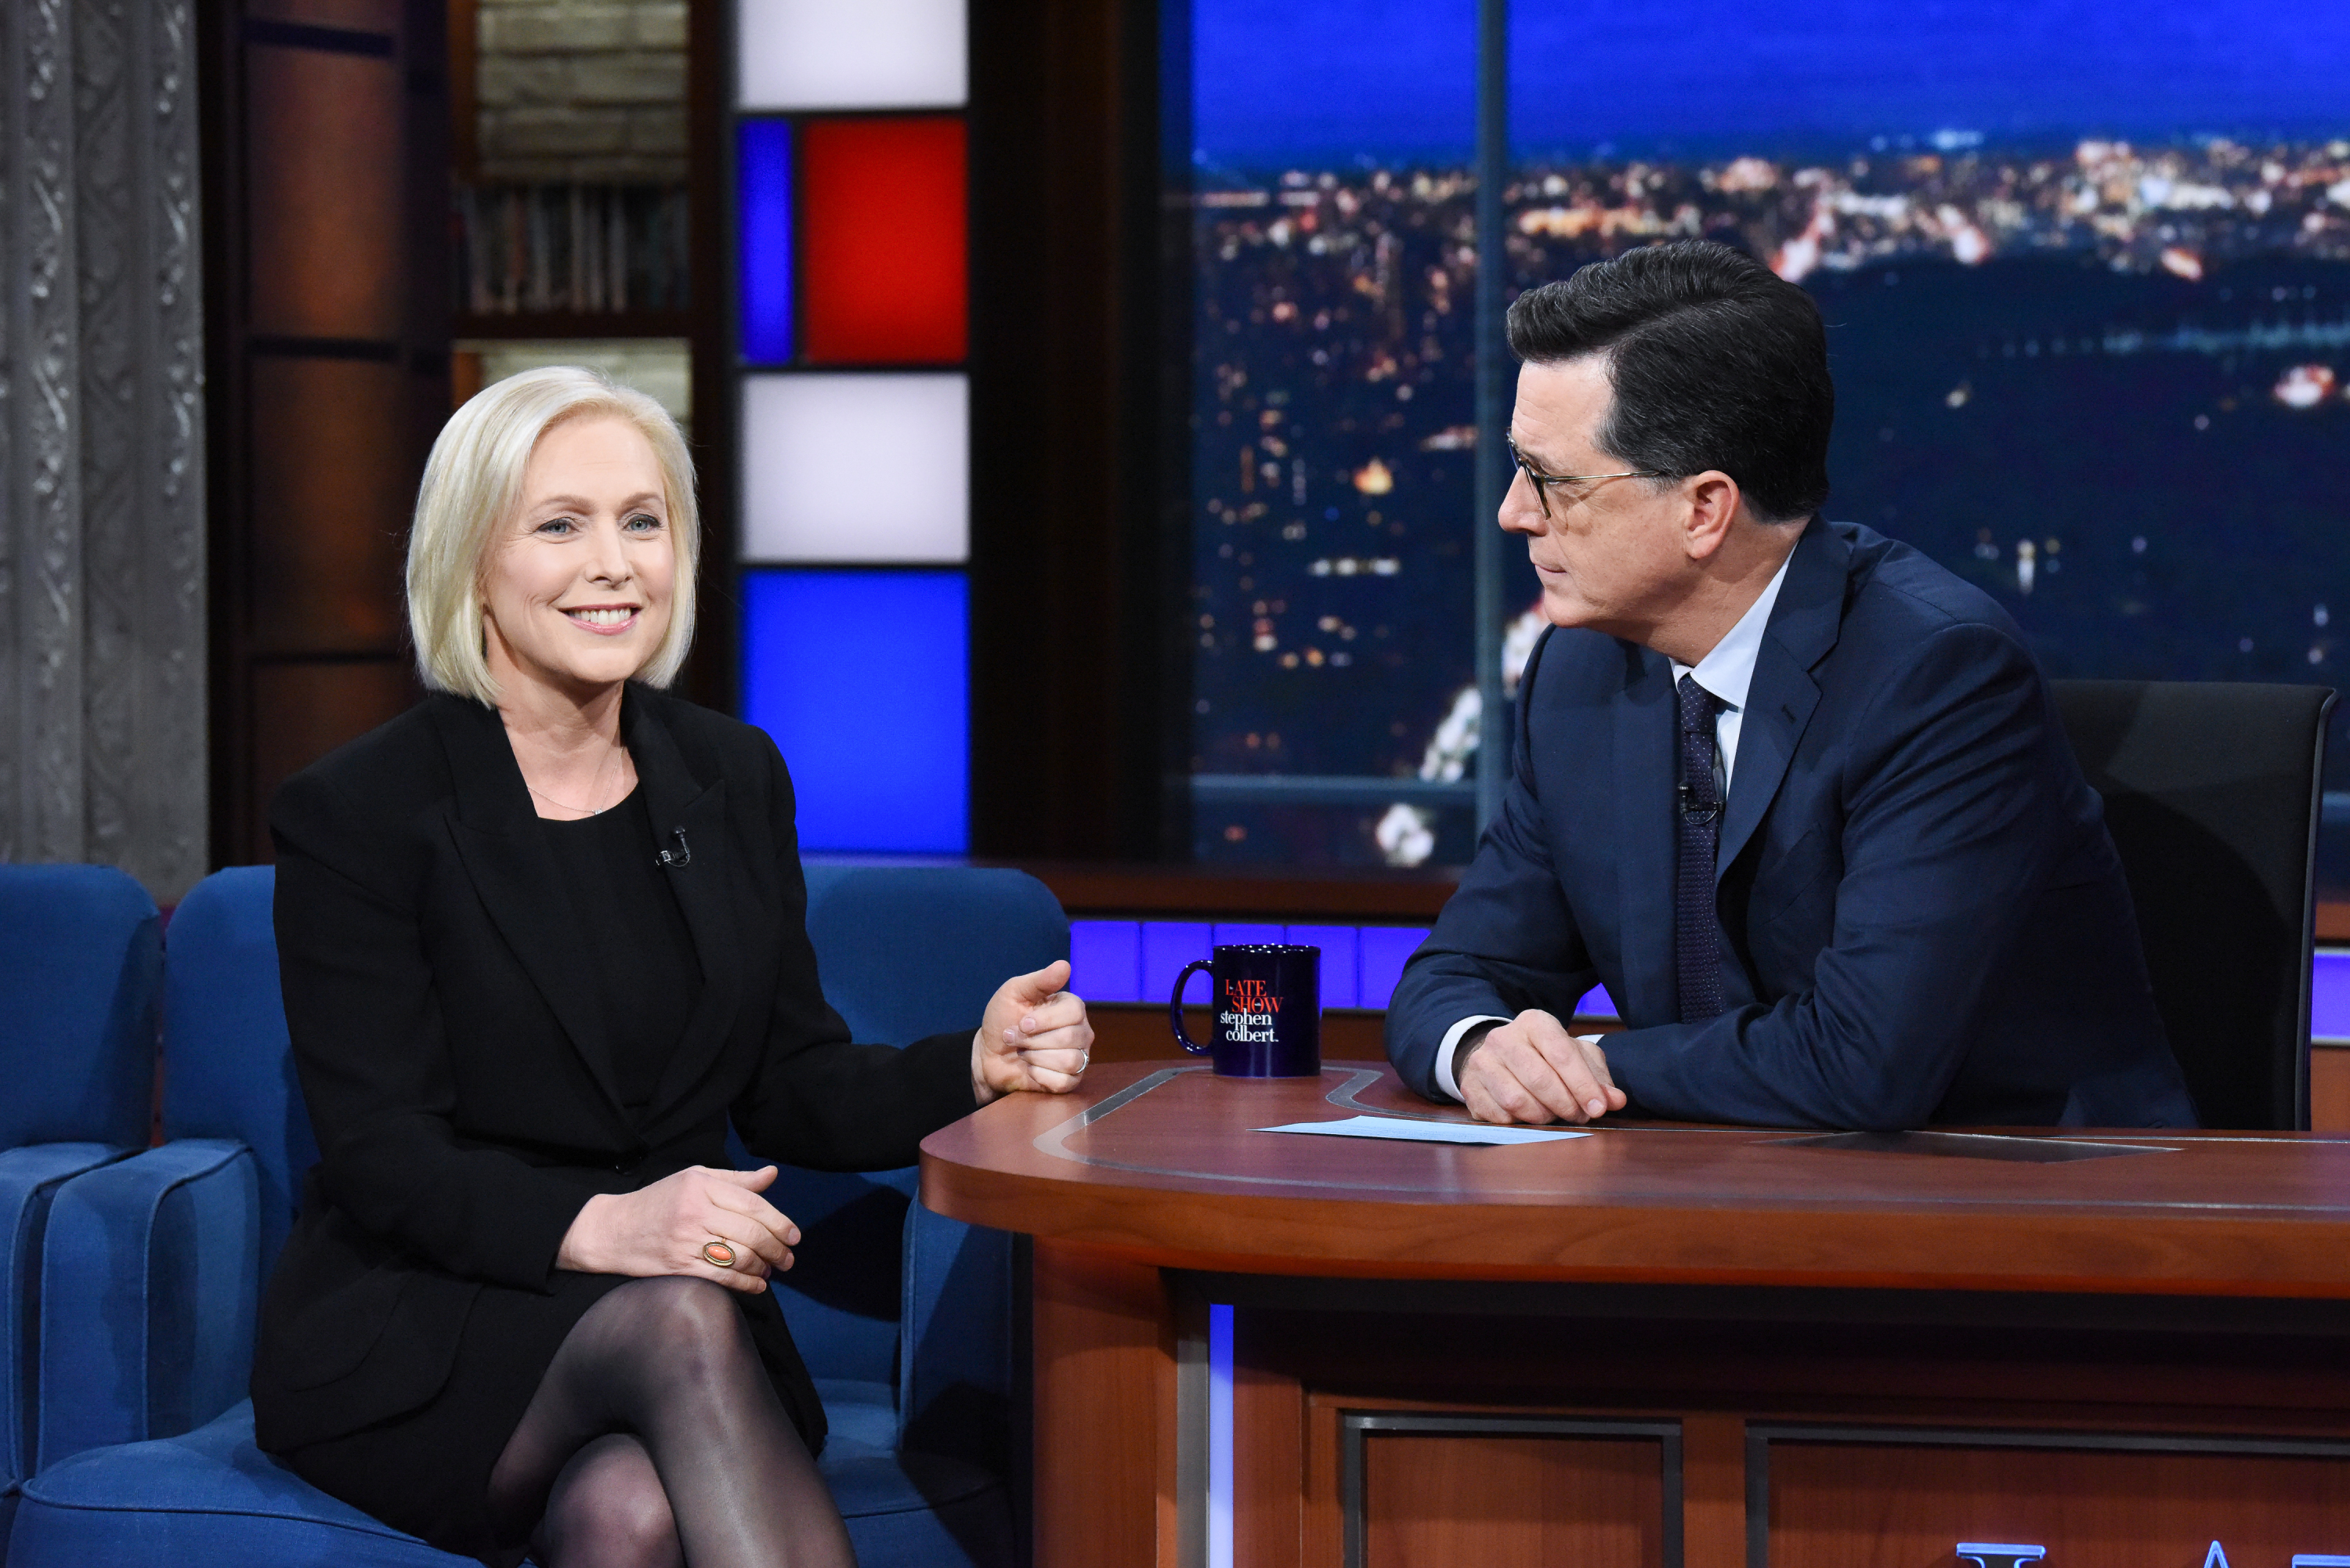 NEW YORK - NOVEMBER 8: The Late Show with Stephen Colbert and guest Sen. Kirsten Gillibrand during Thursday's November 8, 2018 live show. (Photo by Scott Kowalchyk/CBS via Getty Images) (Scott Kowalchyk—CBS/Getty Images)